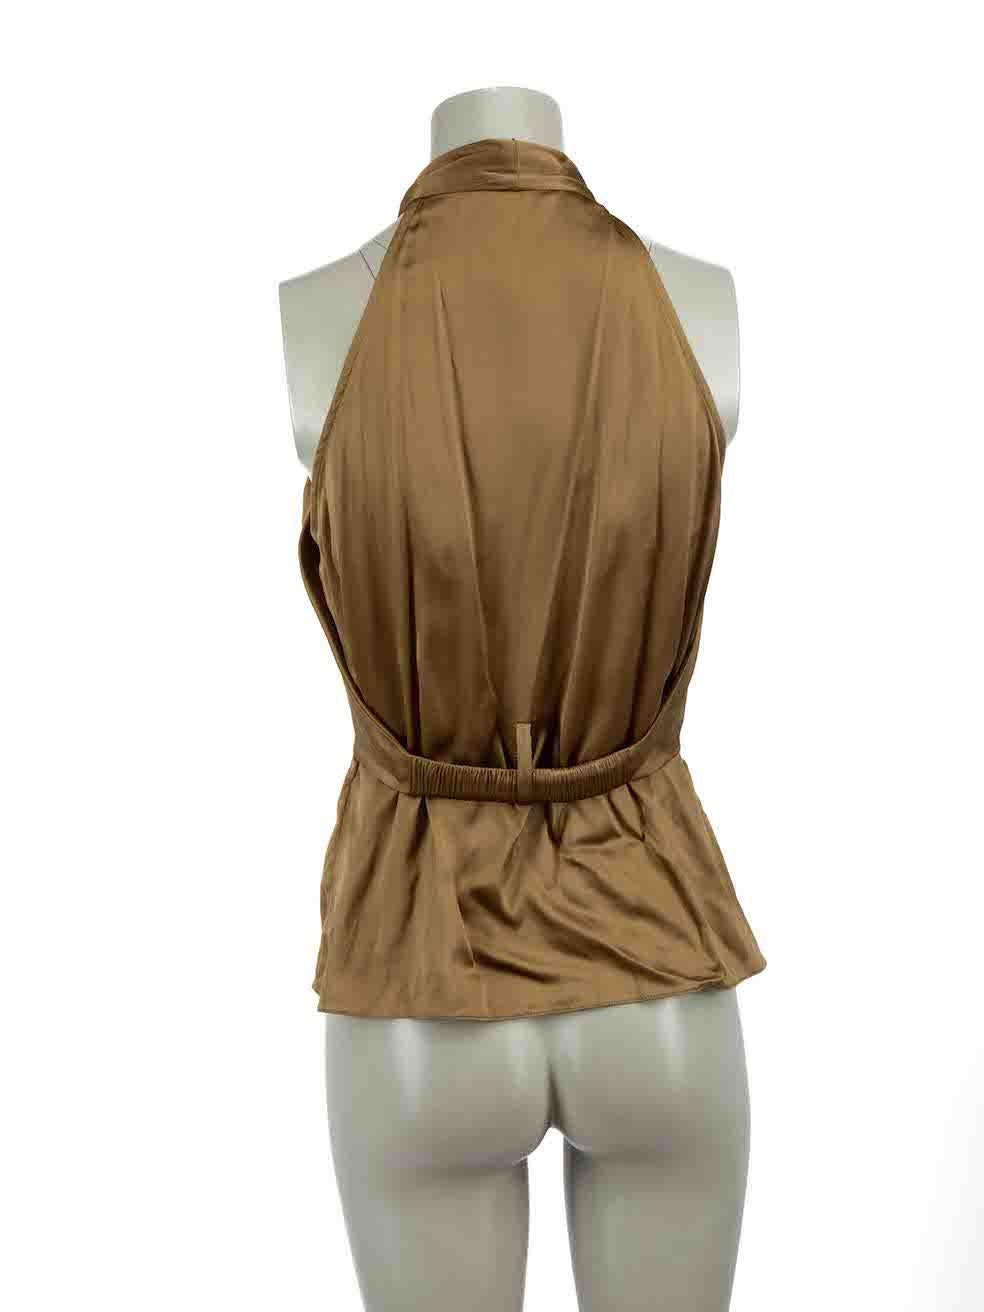 Gucci Olive Green Silk Drape Top Size M In Excellent Condition For Sale In London, GB